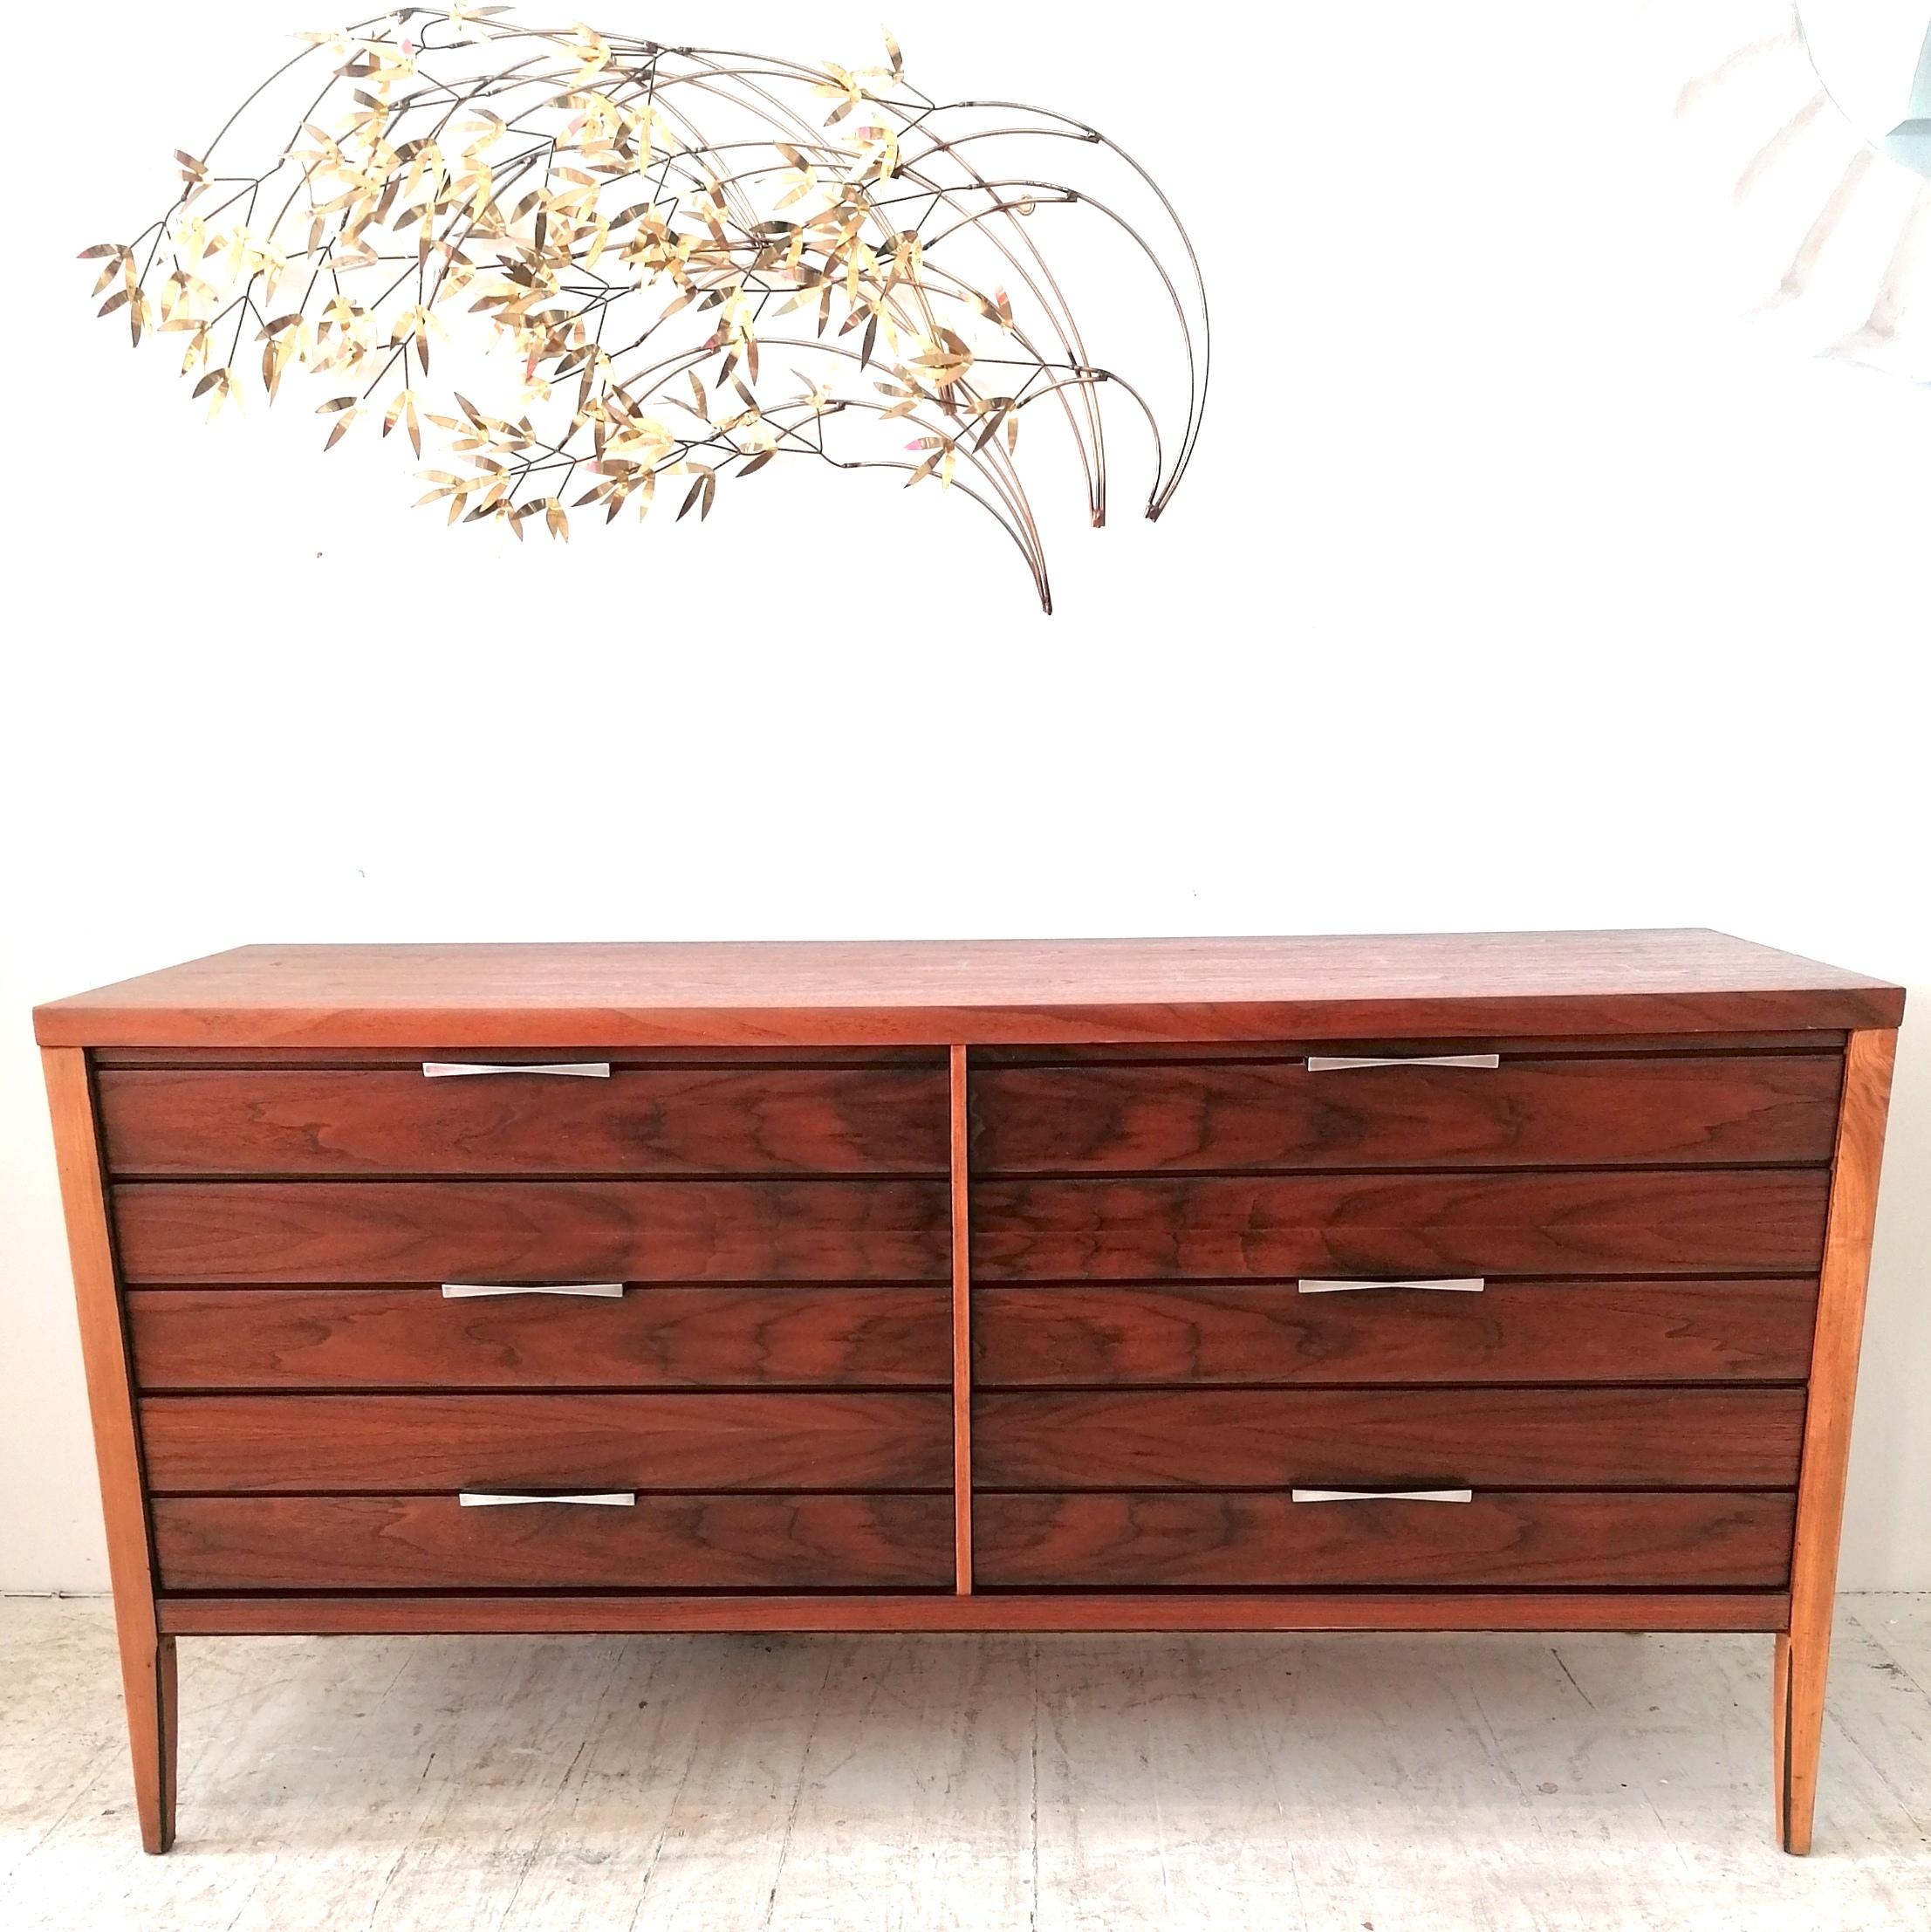 Mid century Tuxedo walnut dresser / sideboard with 6 drawers by Lane Furniture, 1960s. This range is named Tuxedo because of the bow tie-shaped ebony inlay details on the top. The brushed cast aluminium handles are also shaped like elongated bow